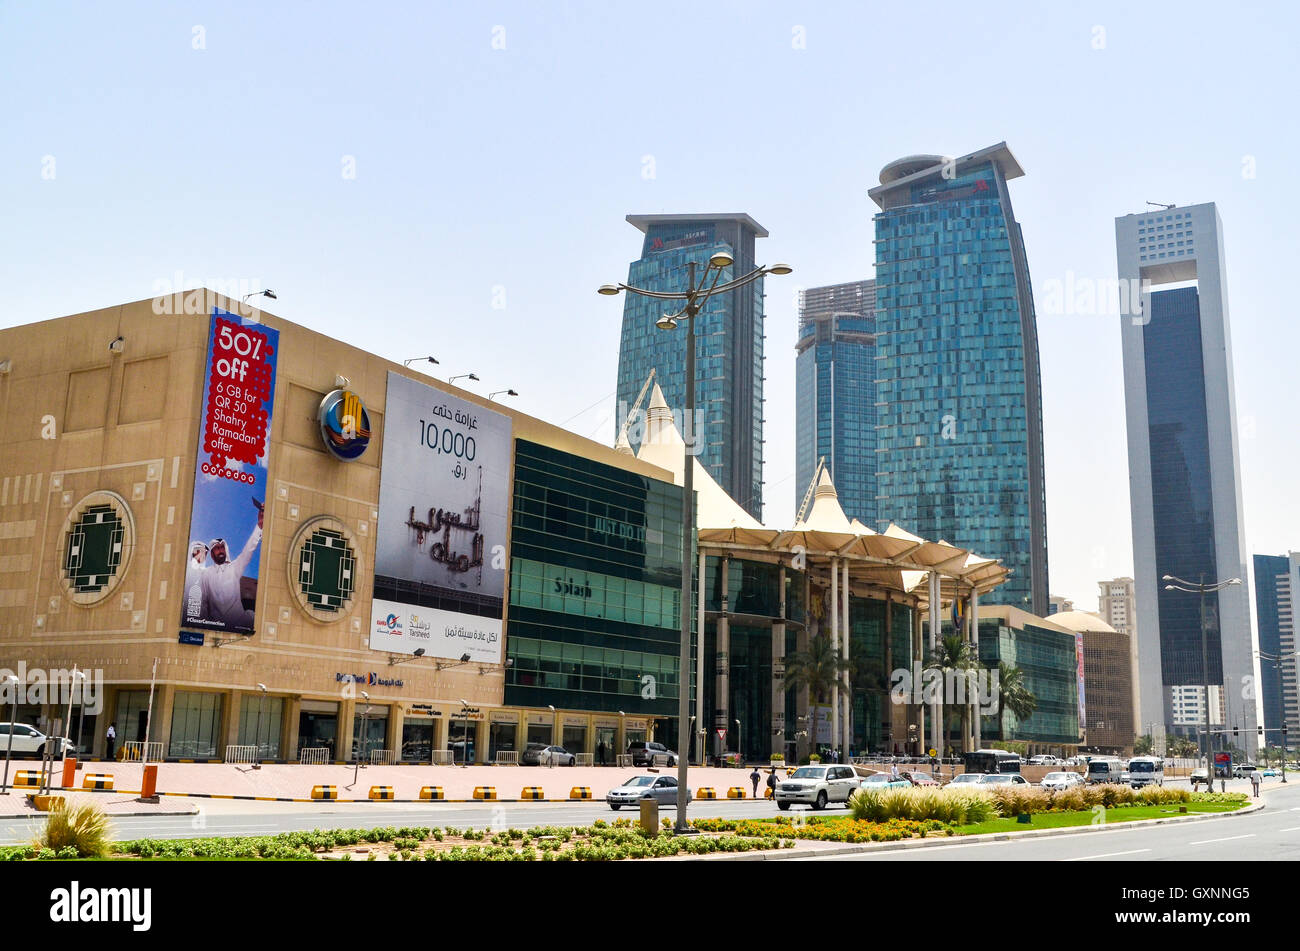 City Center Mall In Doha Katar Qatar Franks Travelbox | Images and ...